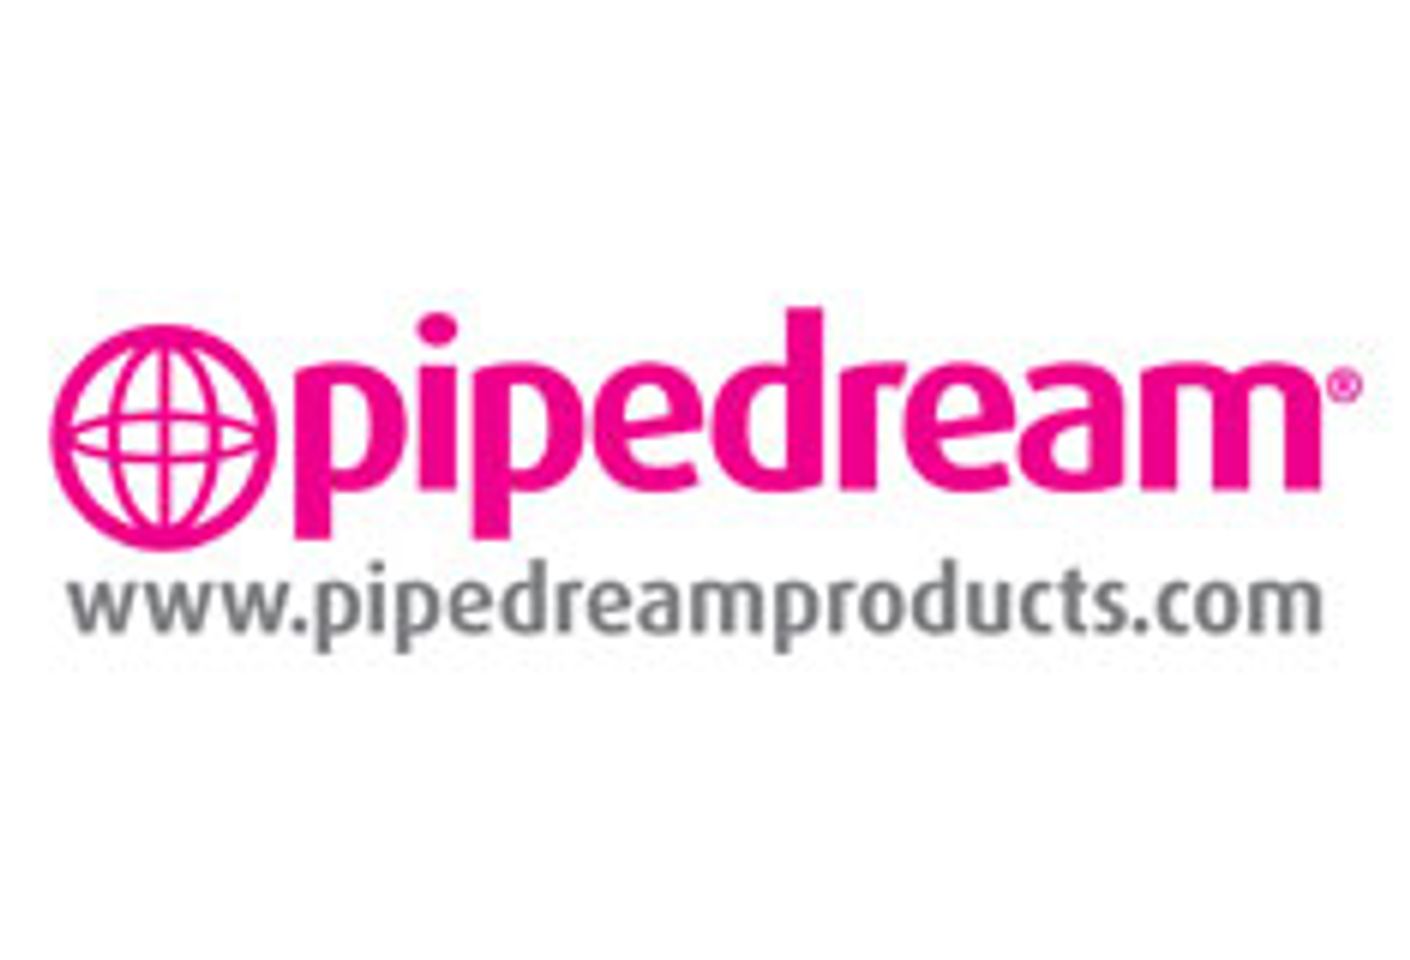 Pipedream Products Nominated for 6 'O' Awards